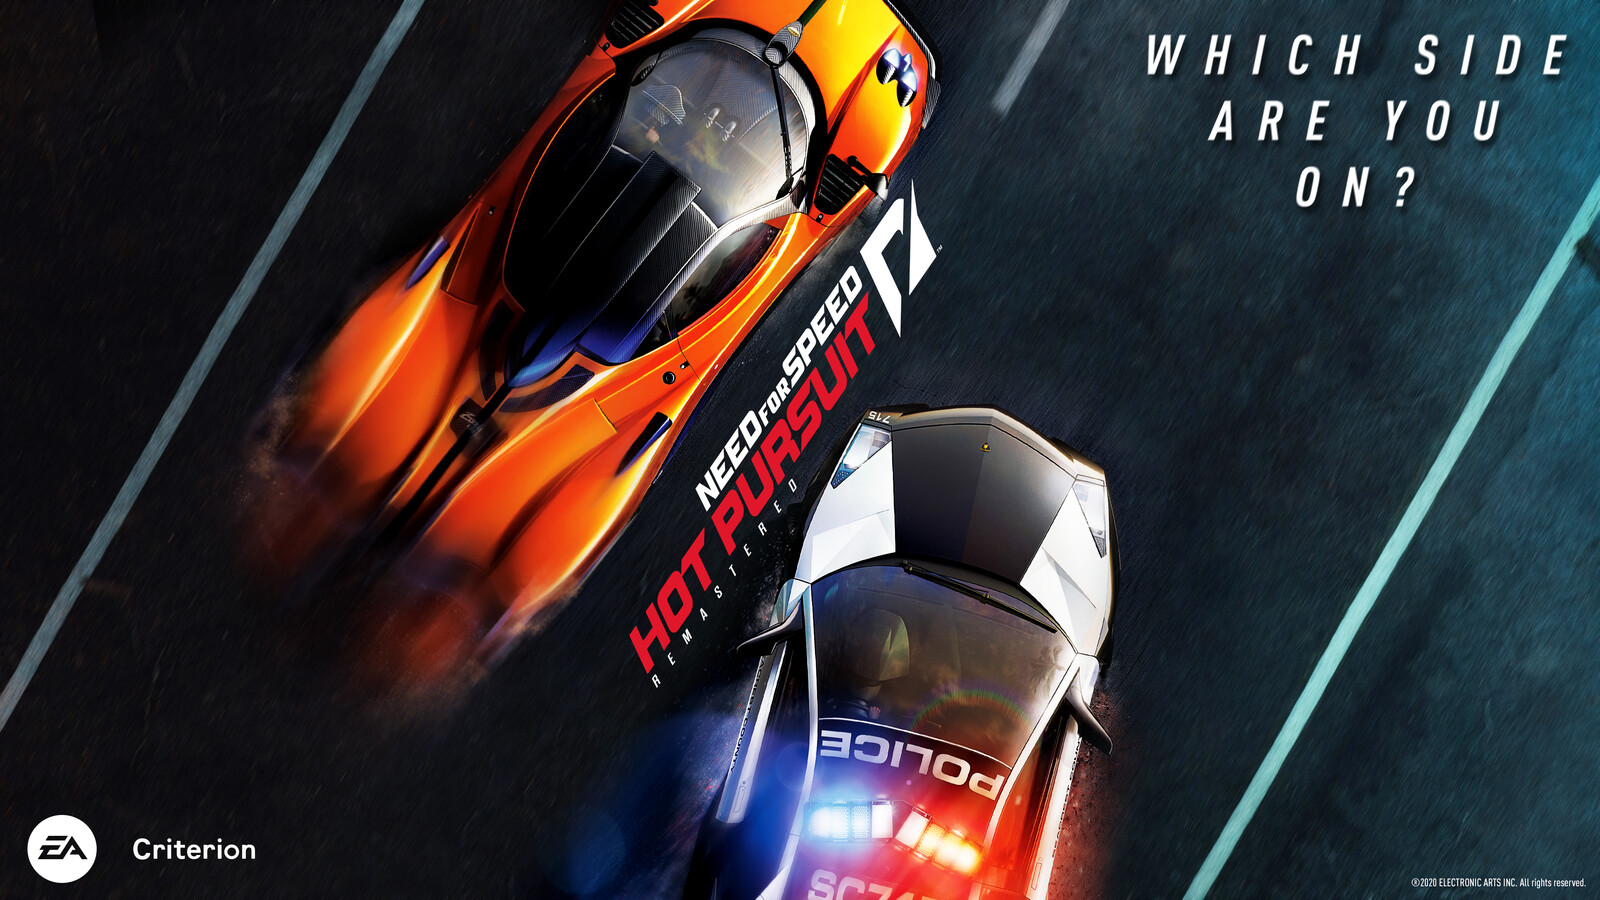 Promotional Banner for Need for Speed Hot Pursuit Remastered.

https://www.ea.com/en-gb/games/need-for-speed/510